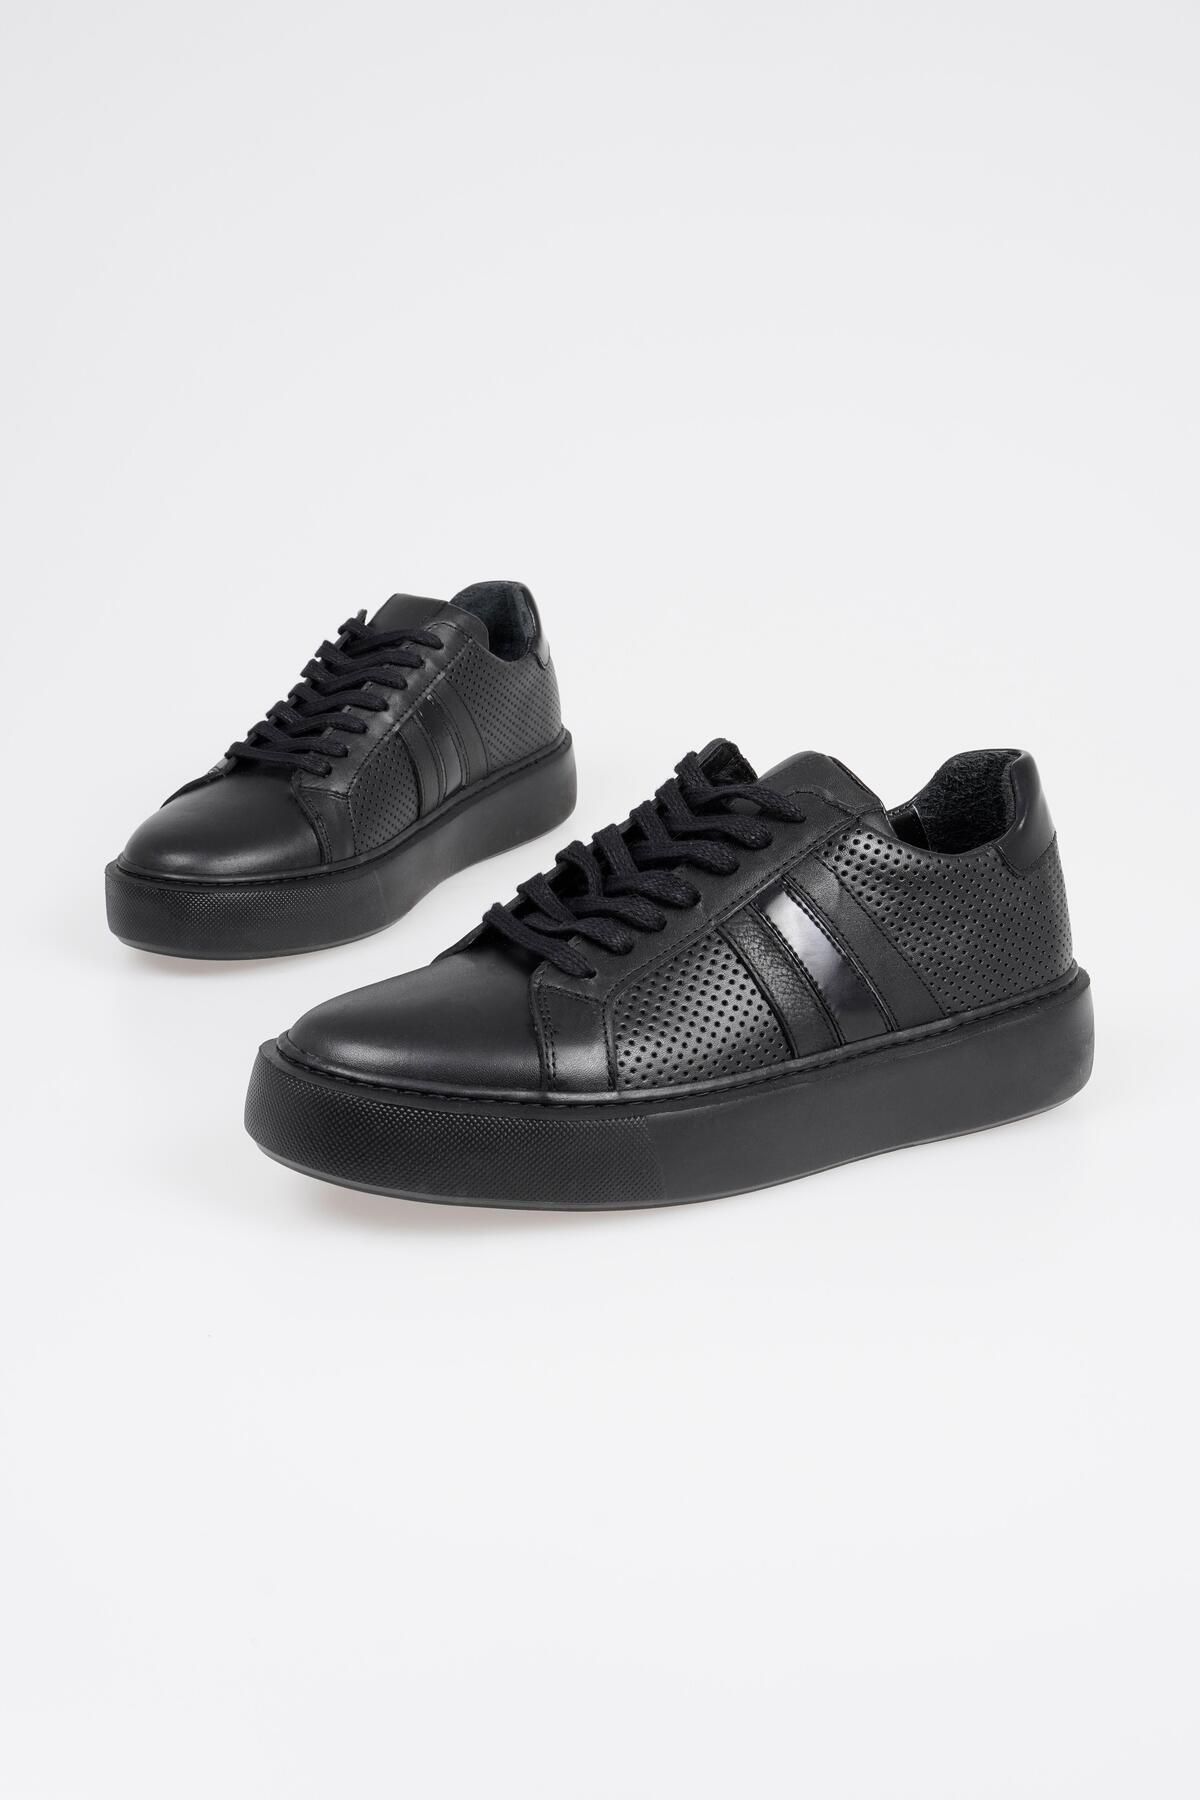 MONOCHROME CHUNKY SOLE SNEAKERS